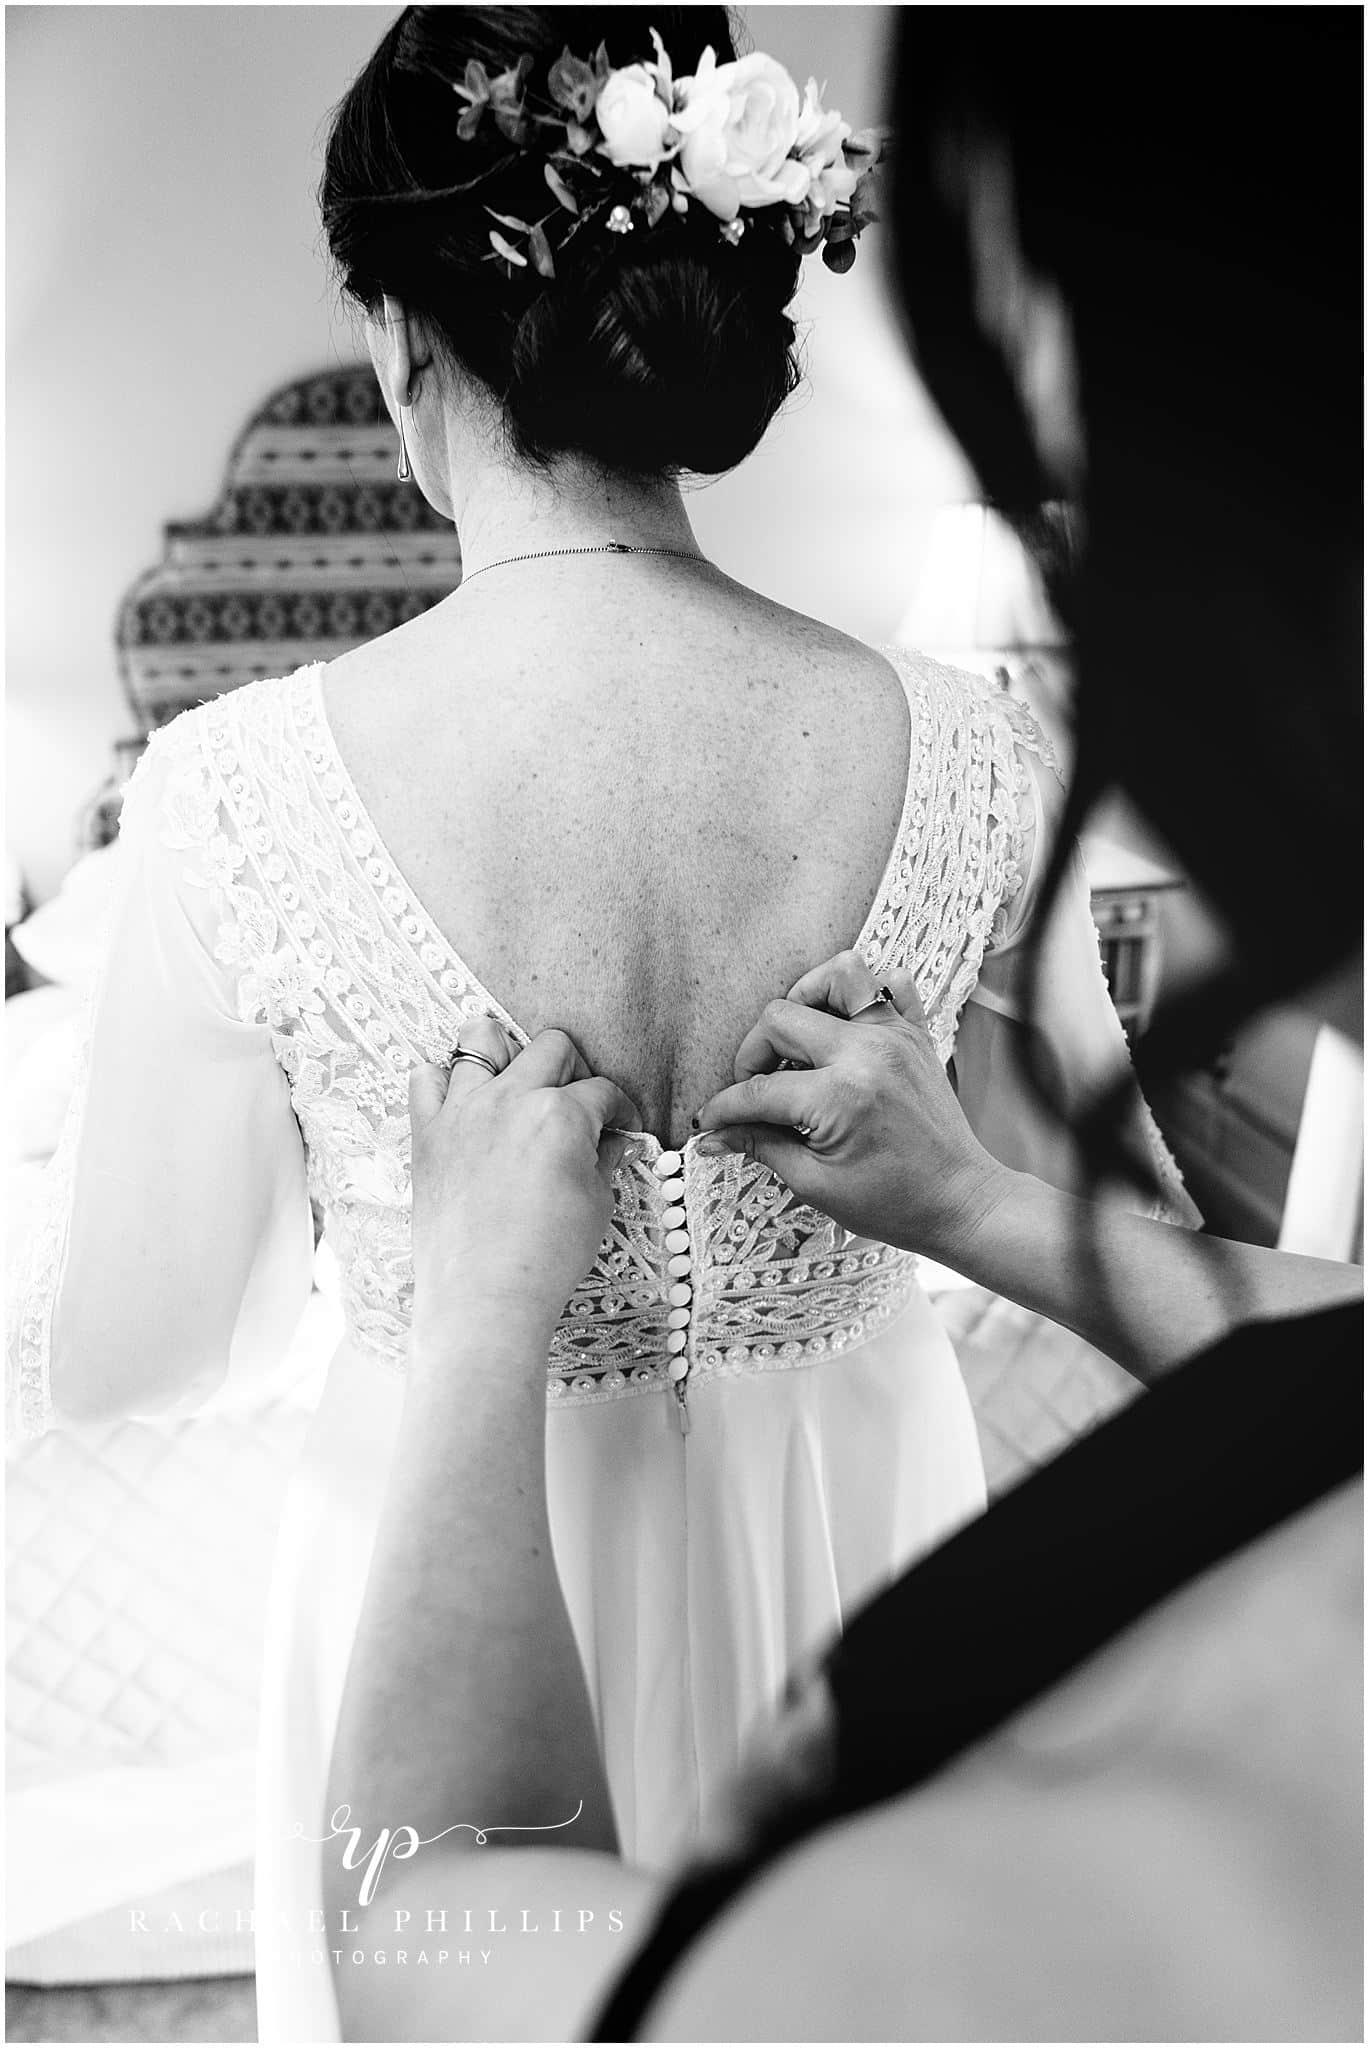 the back of the brides dress as shes helped to get ready, photo in black and white